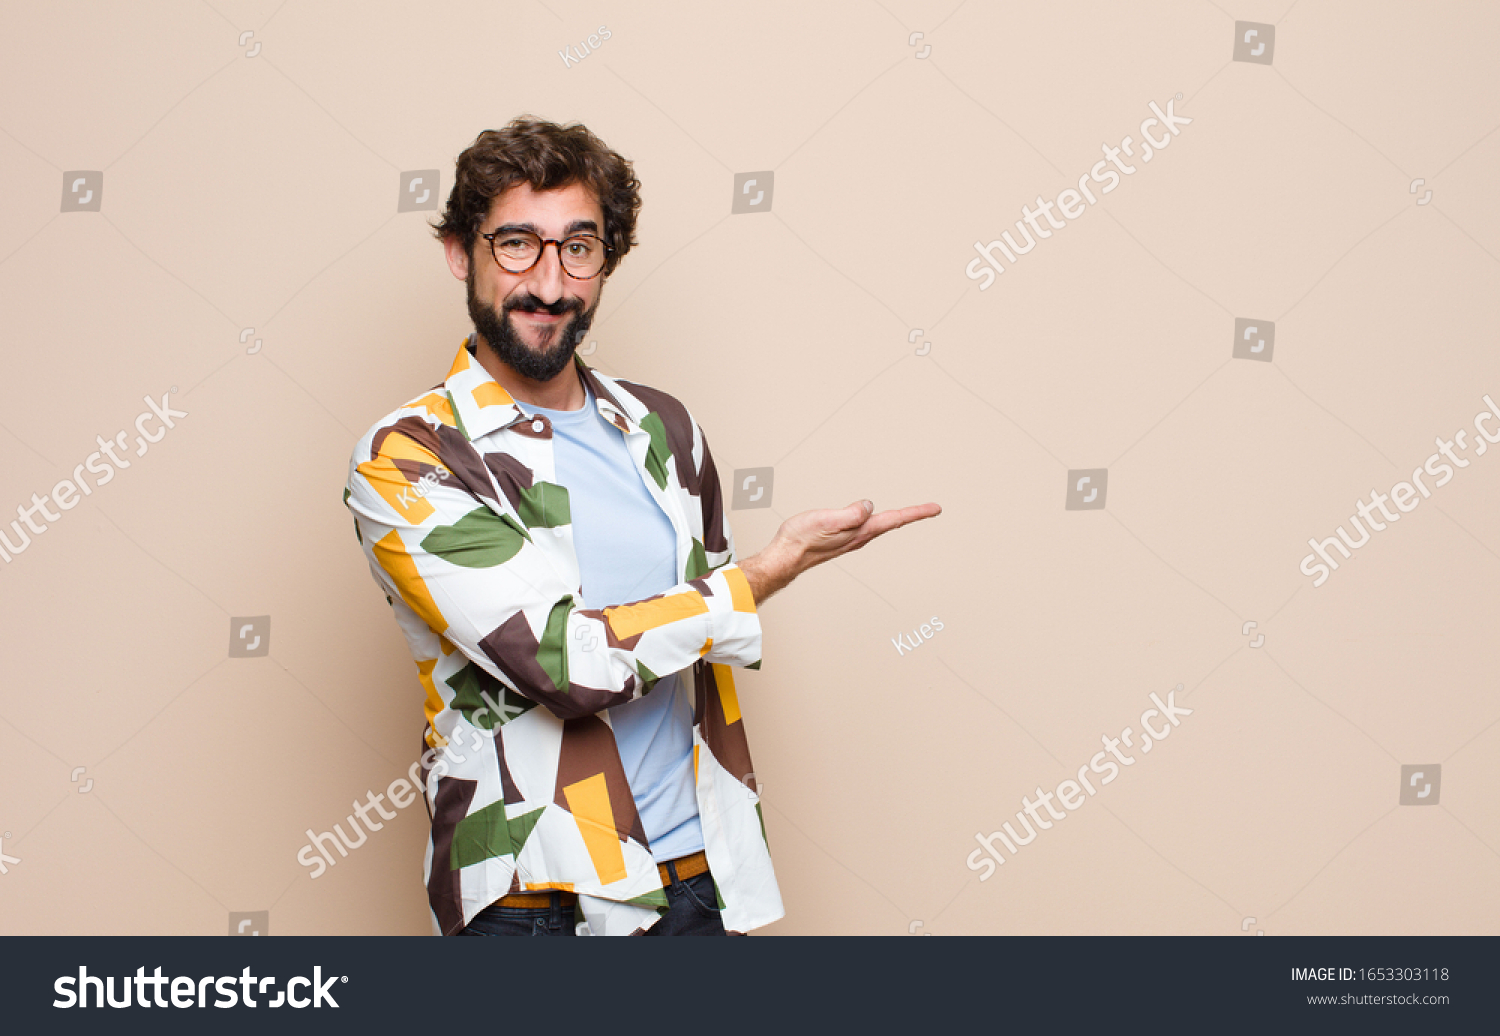 young cool bearded man expressing a concept against flat wall #1653303118